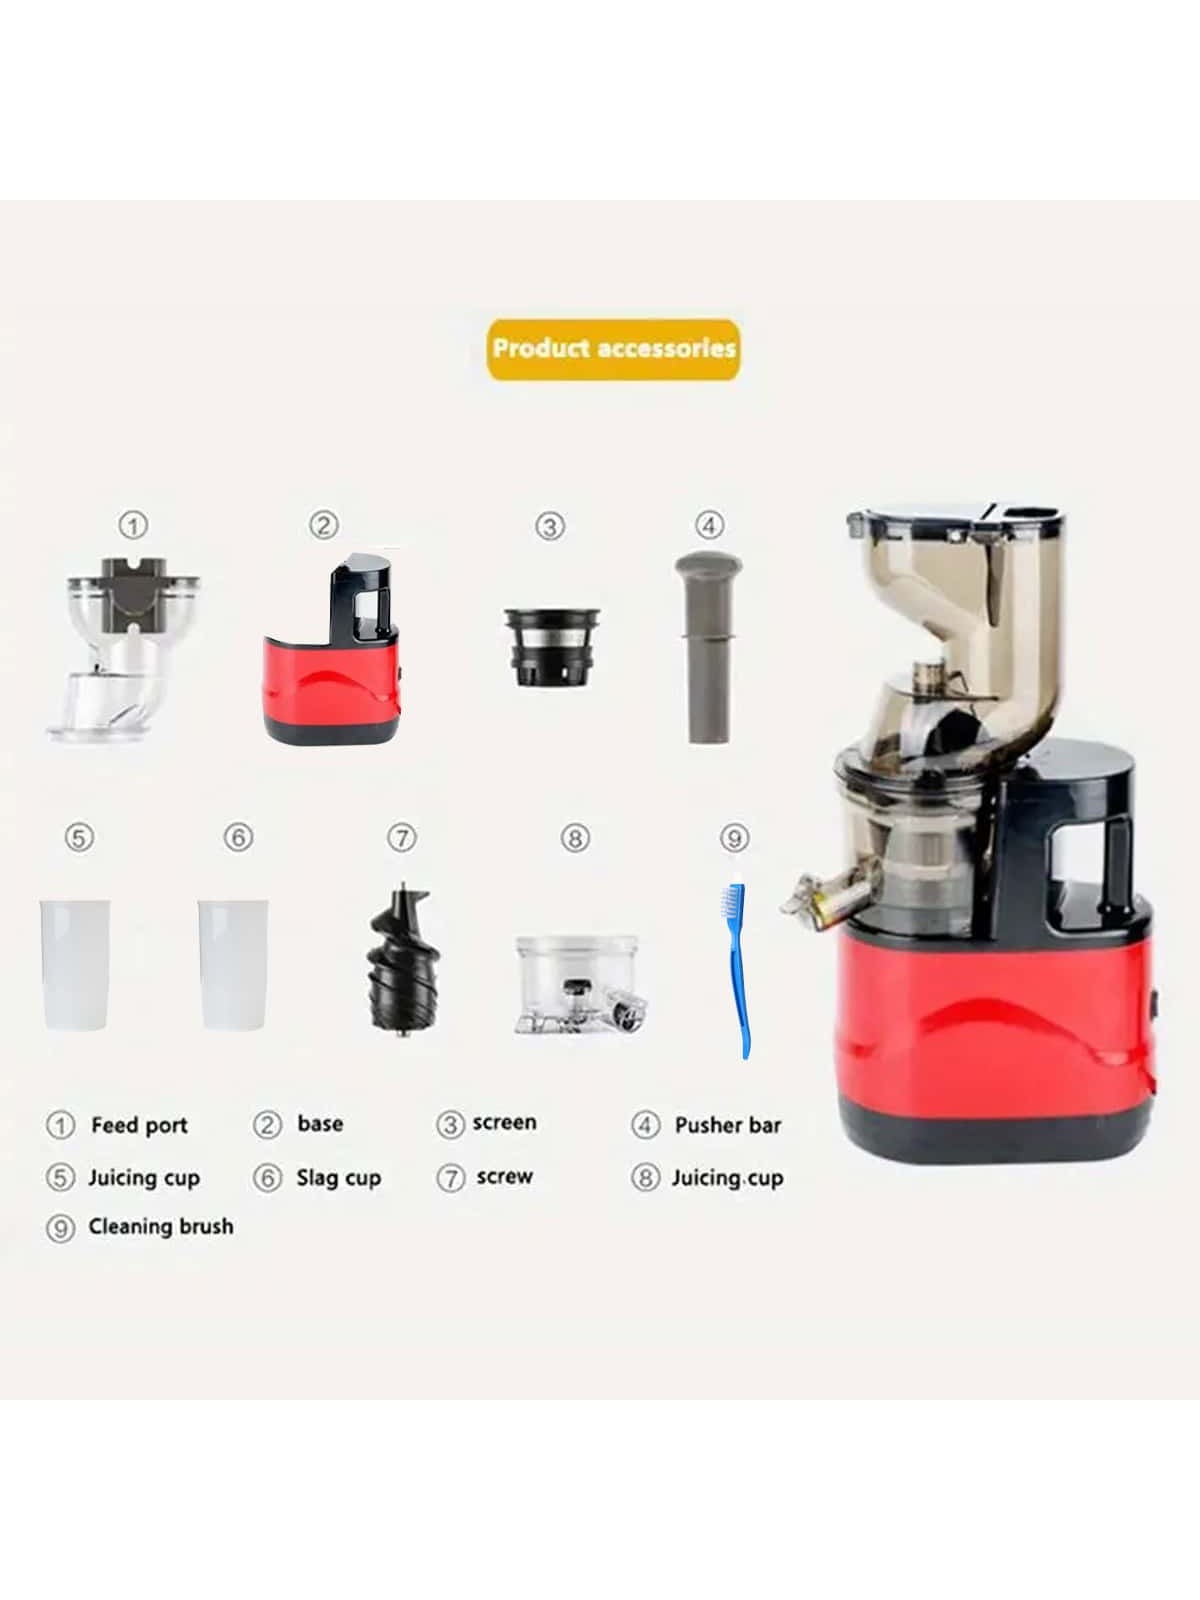 US/EU Plug Slow Juicer, Matte Black Juicer Machine, Slow Juicer Cold Press With 5.1in/14cm Wide Feed Chute, Vegetable And Fruit, Juicer Machine For Home Use With Brush, Easy To Clean, With Juice Cap Coarse Strainer, Tofu Press-Red-10